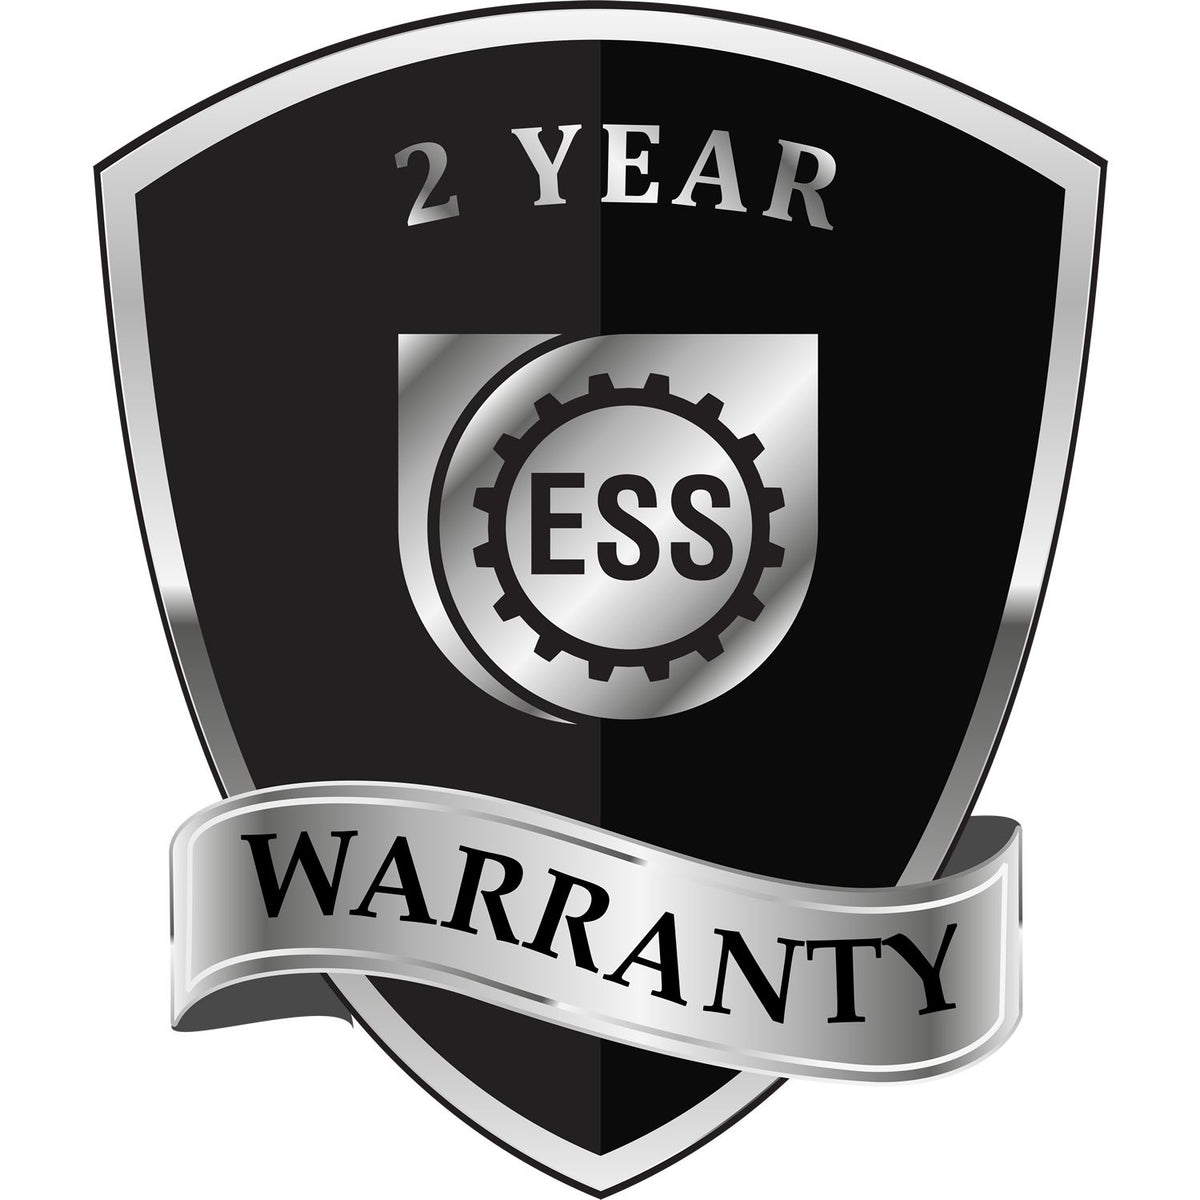 A badge or emblem showing a warranty icon for the Wyoming Engineer Desk Seal